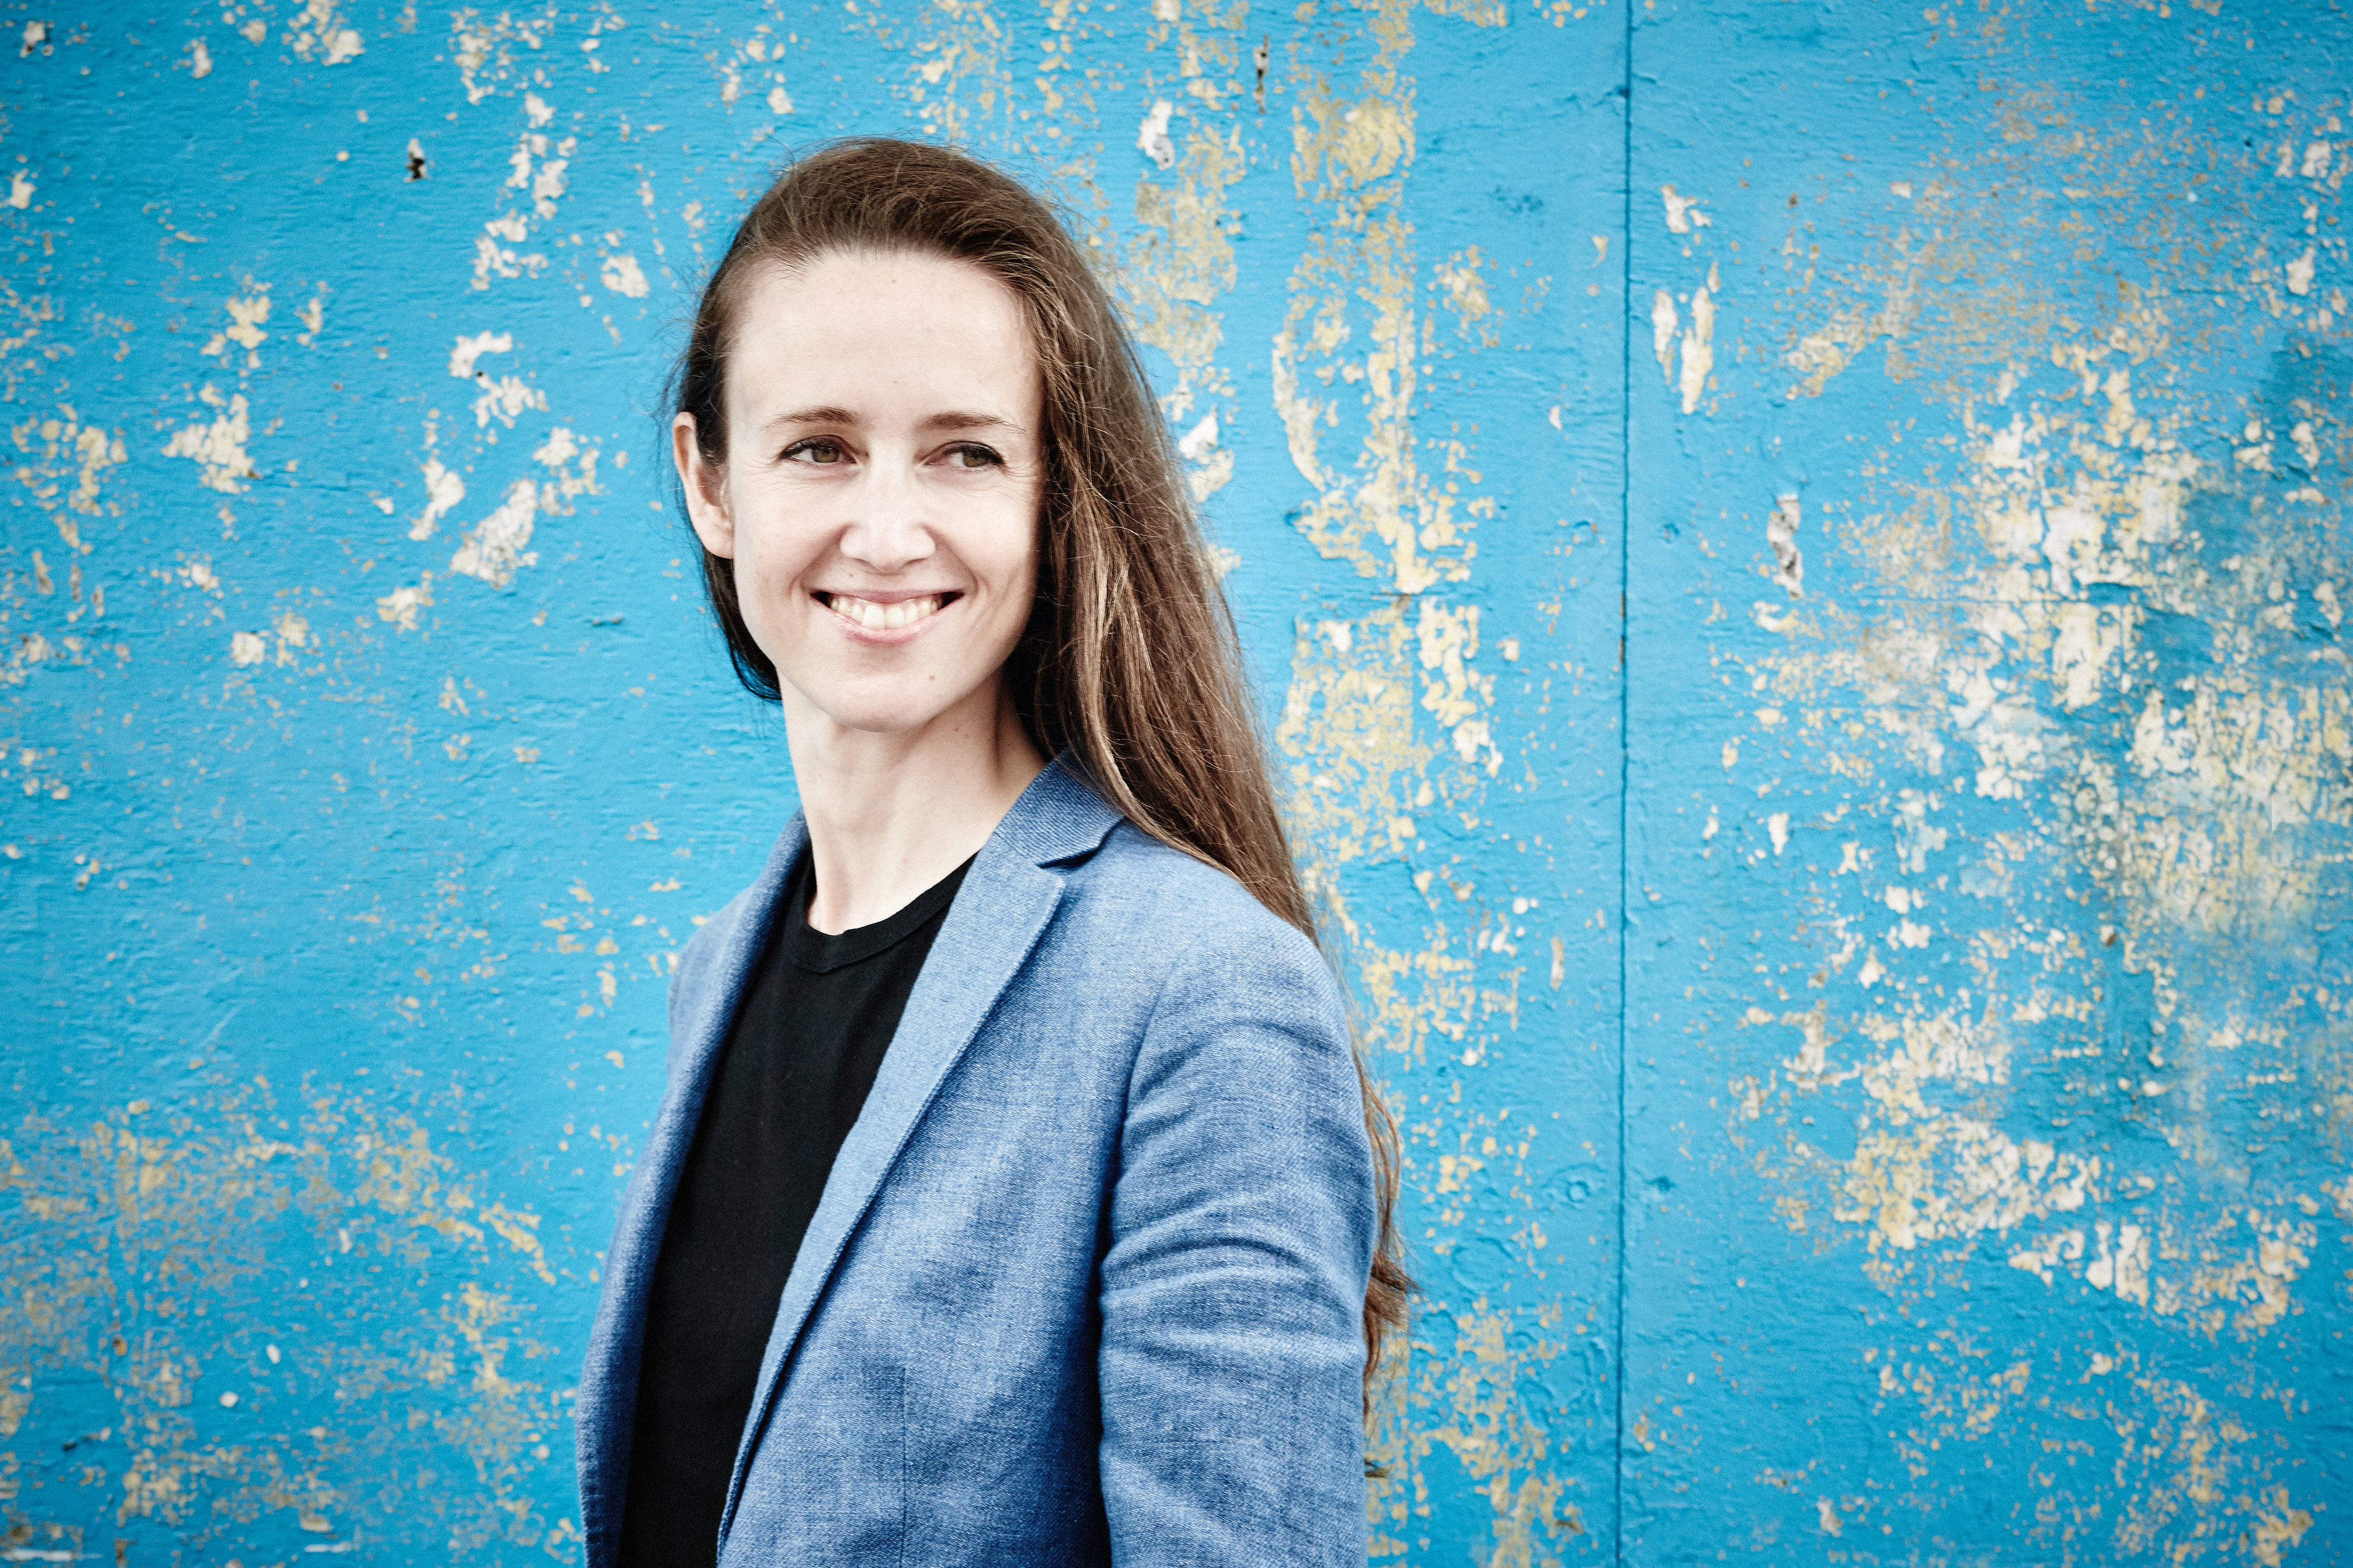 A portrait of conductor Jessica Cottis smiling against a painted blue wall